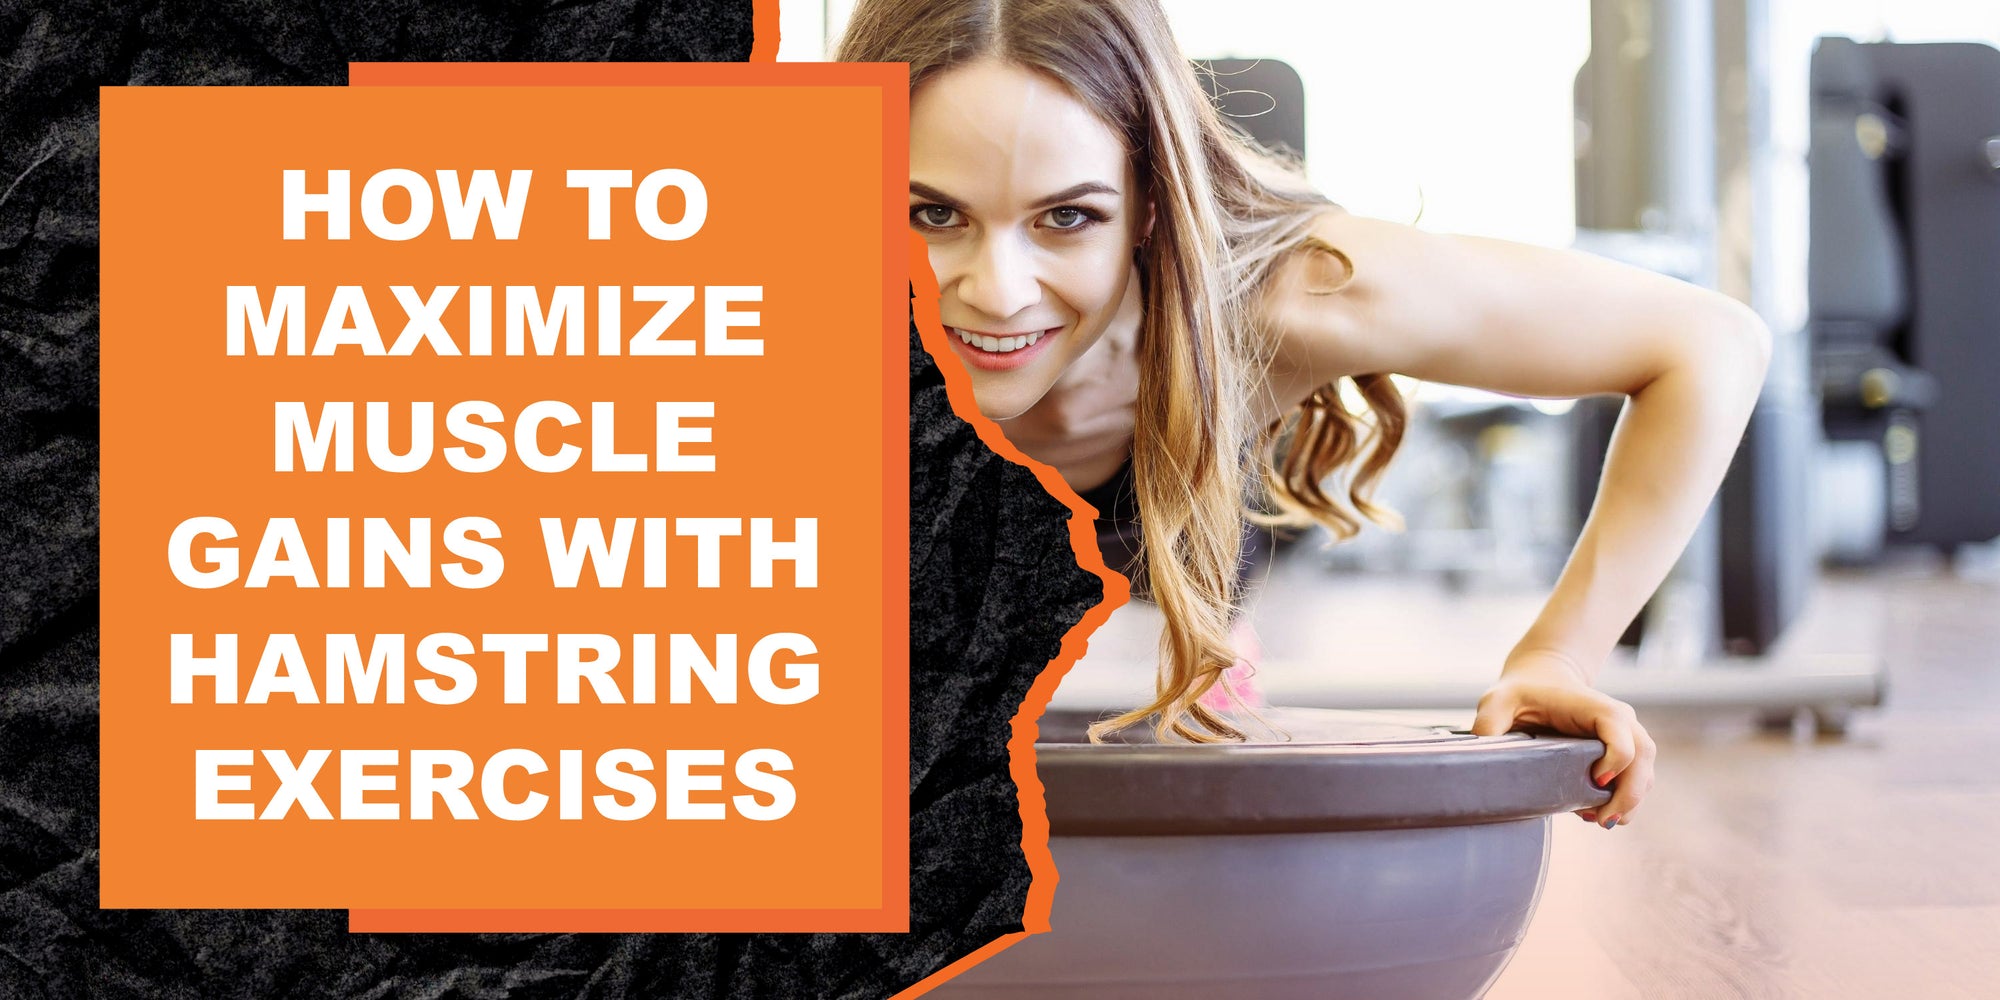 How to Maximize Muscle Gains with Hamstring Exercises